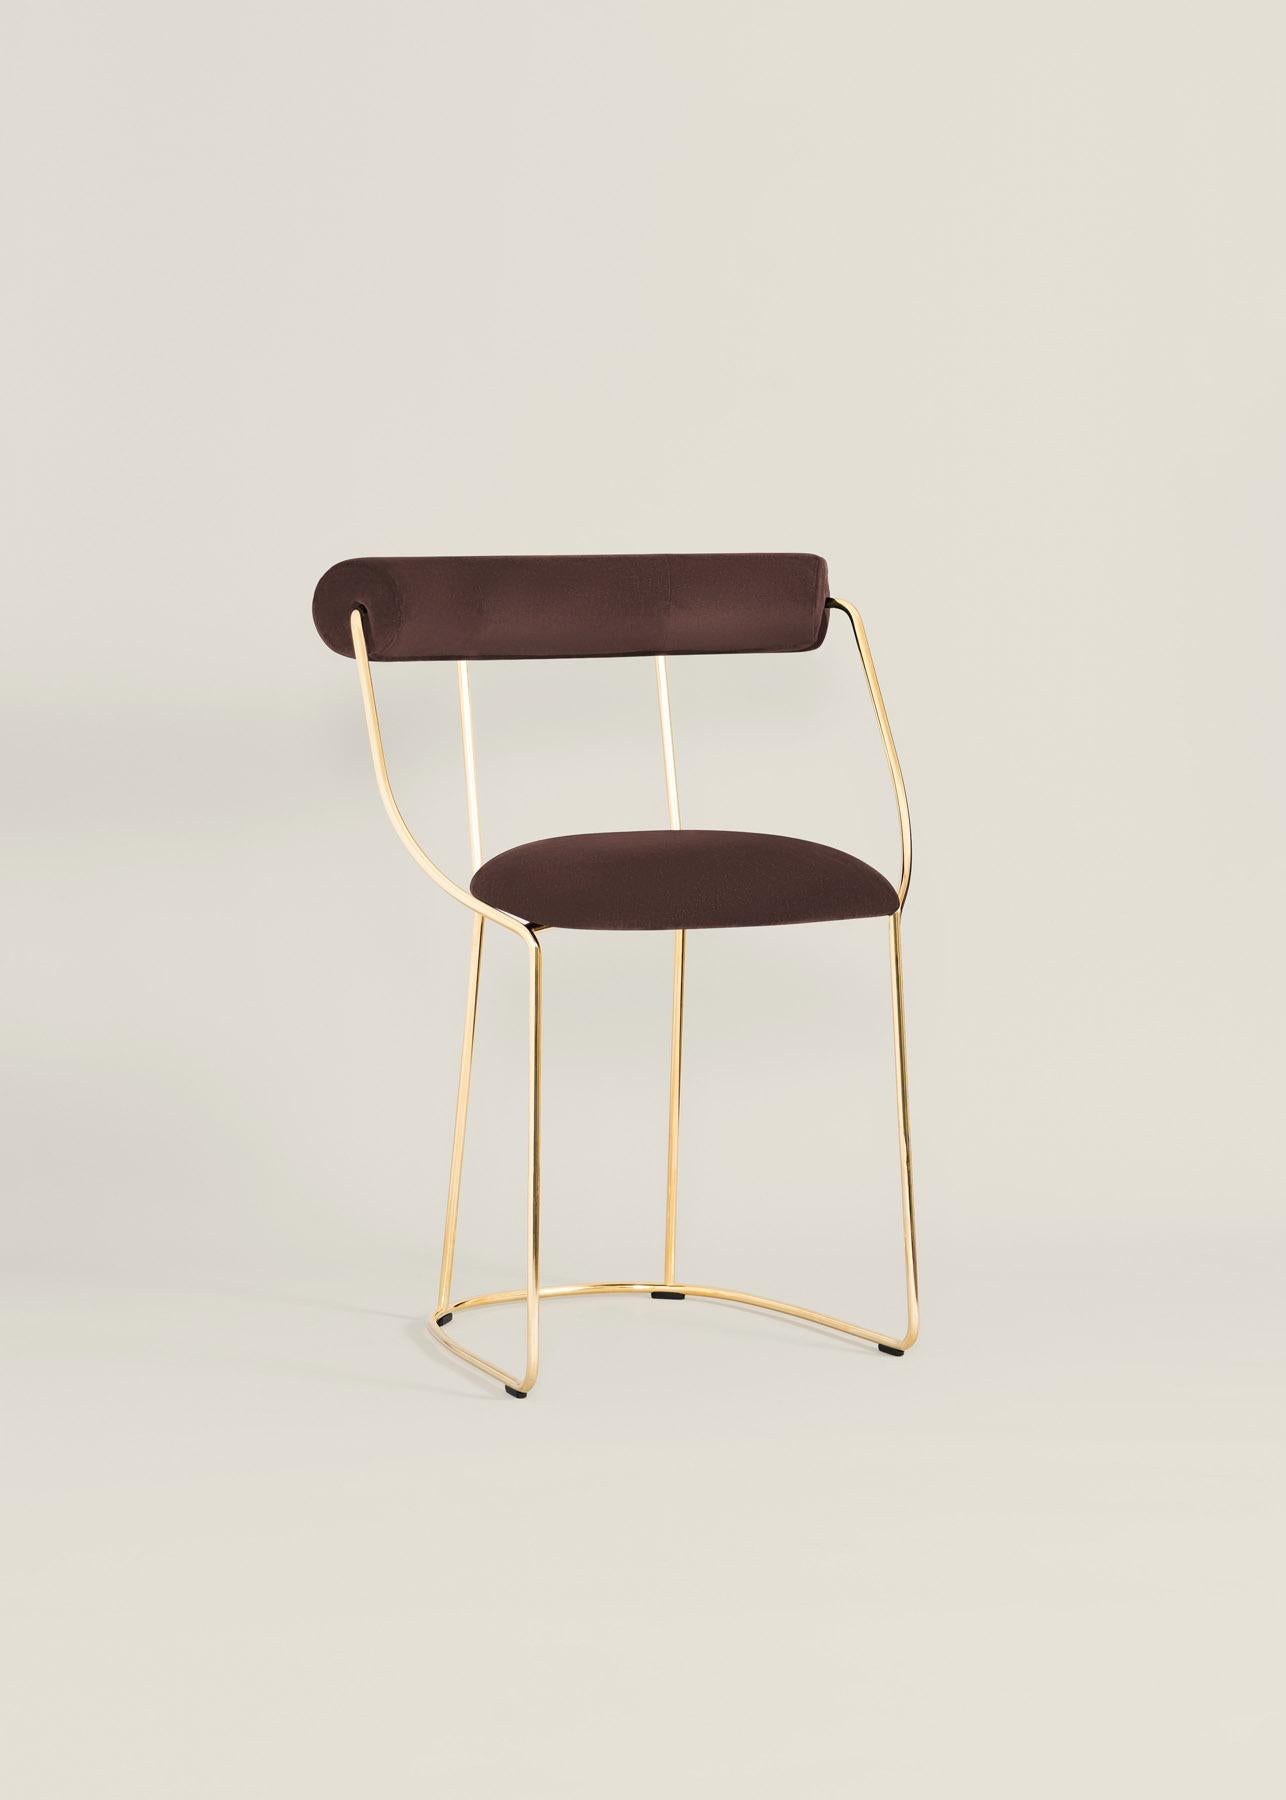 Fran, a continuous element extending from the base upwards, outlining a spacious, inviting, padded, and removable backrest that envelops the seat in its downward return. The result is a chair with an ancestral, elegant, lightweight, durable design,